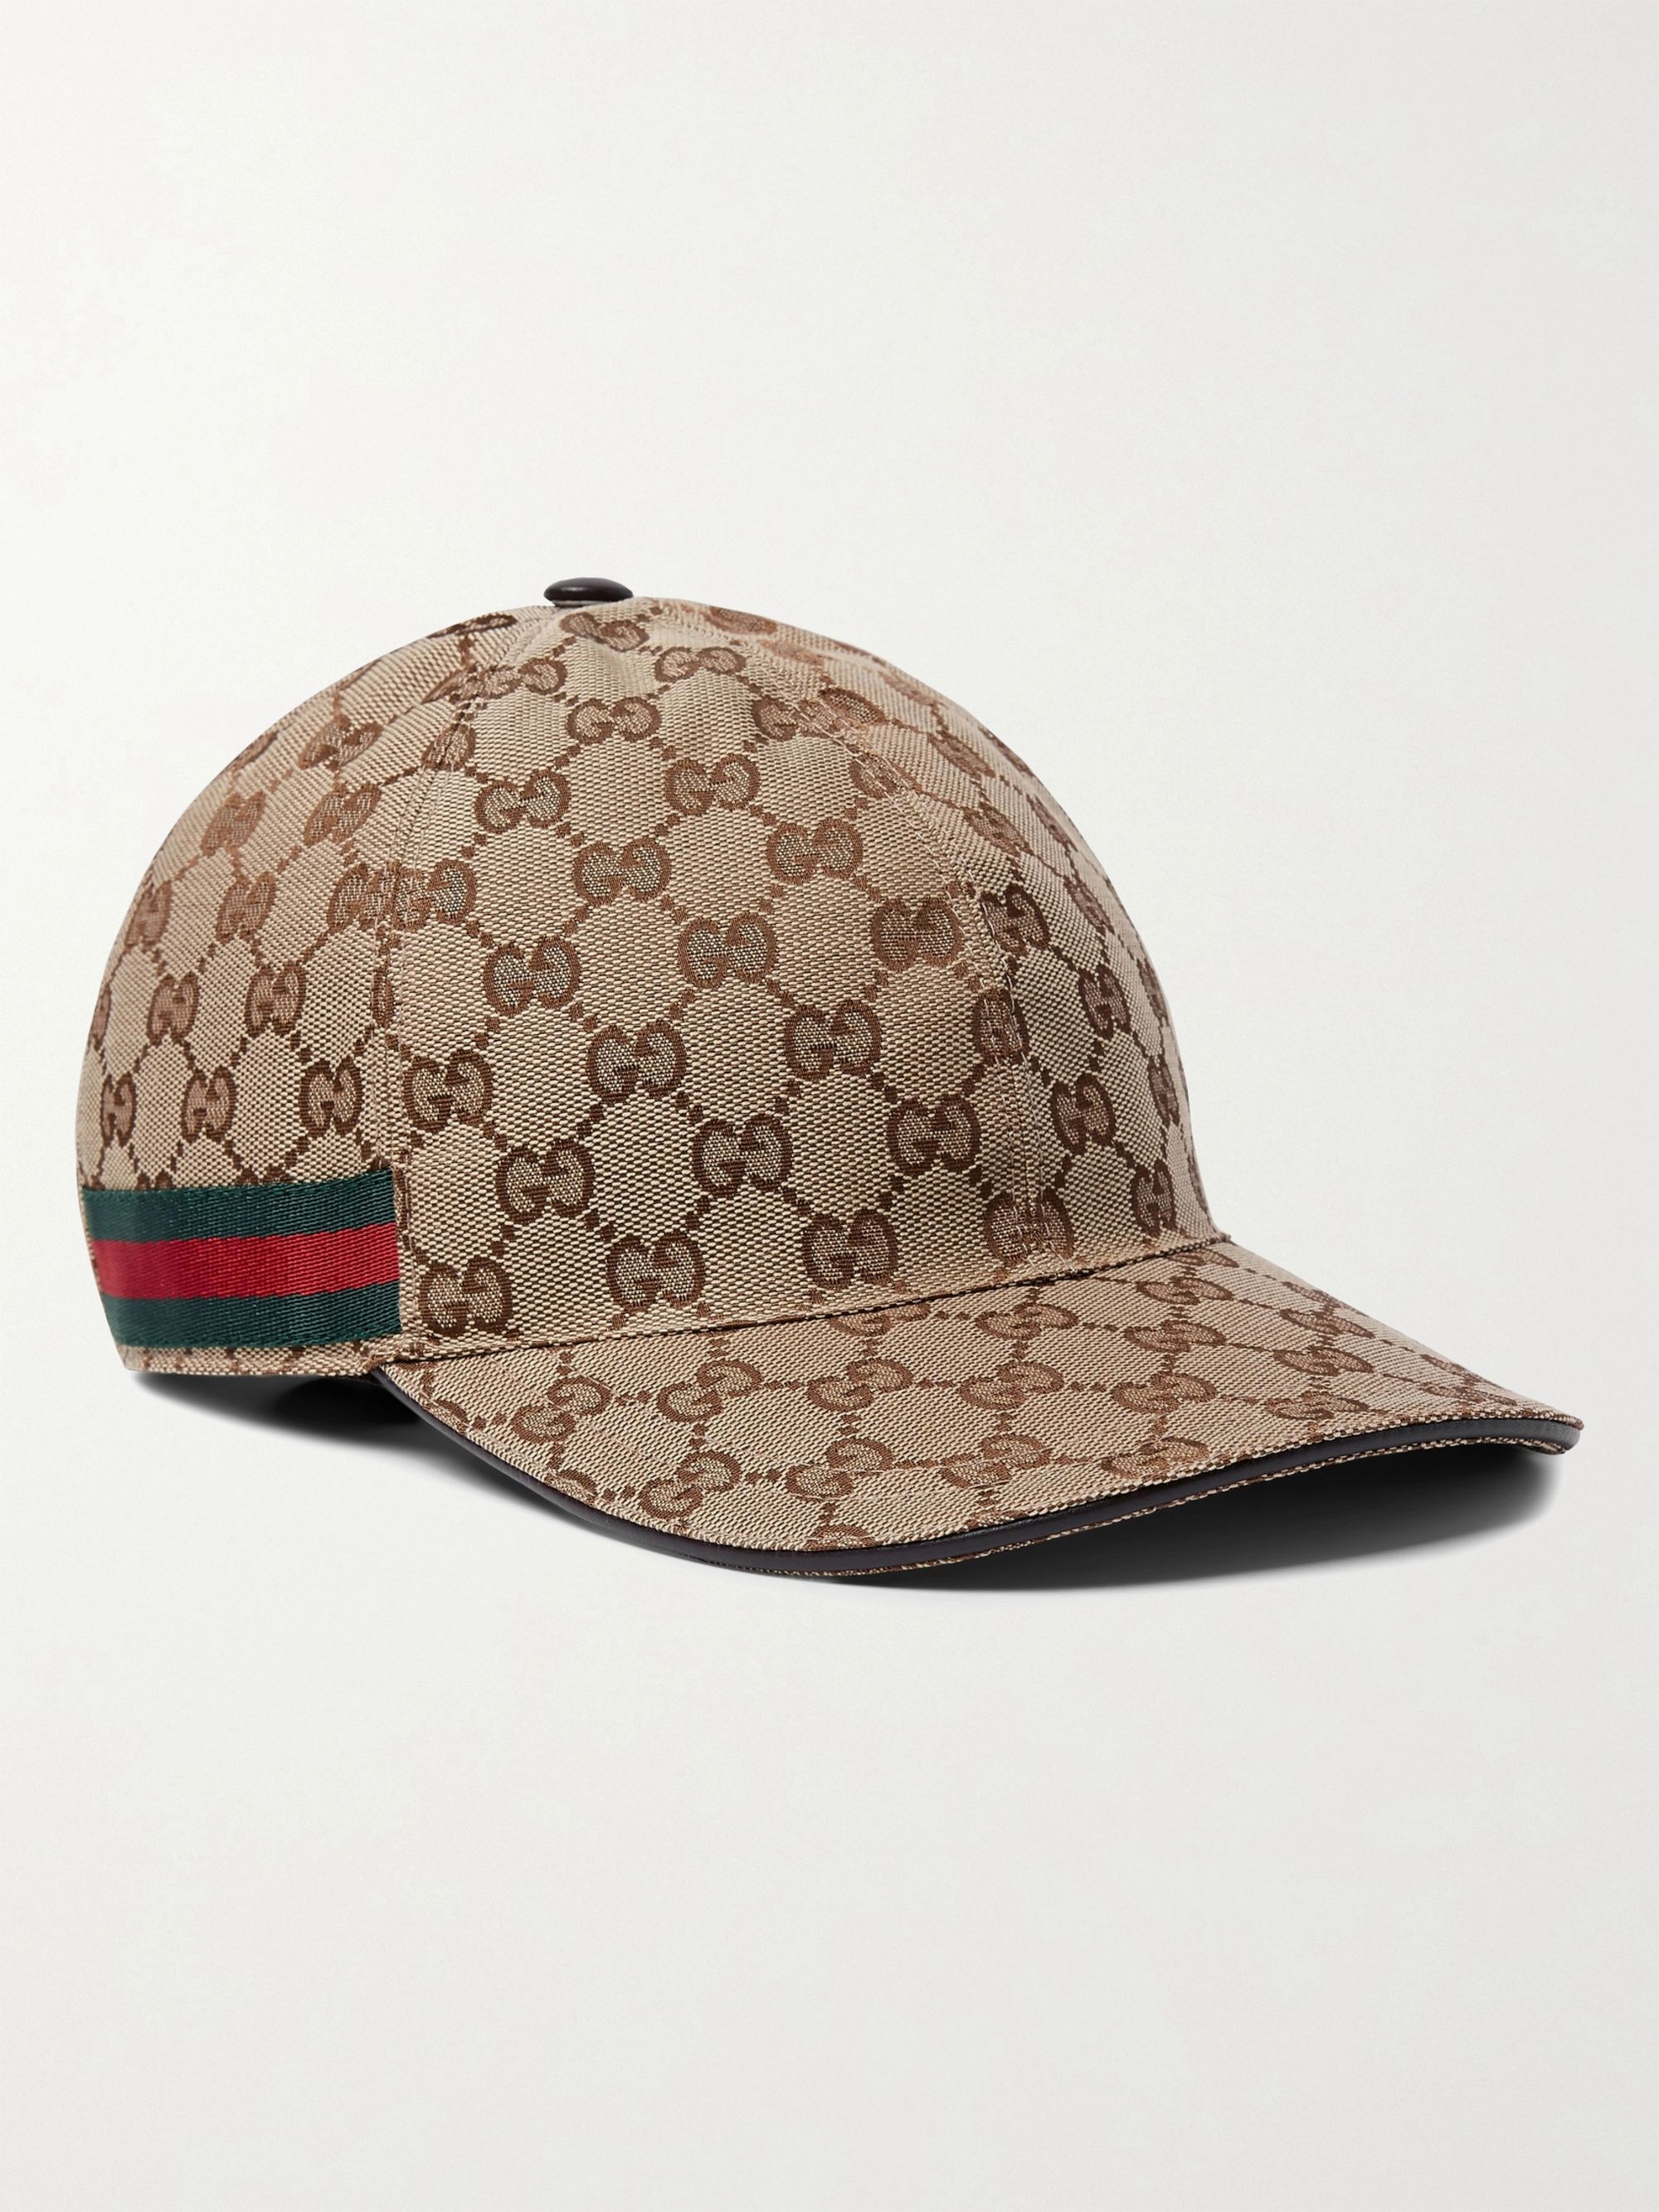 Gucci Cap / Gucci Monogram 'GG' Print Trucker Cap with Tiger and Wolf ...